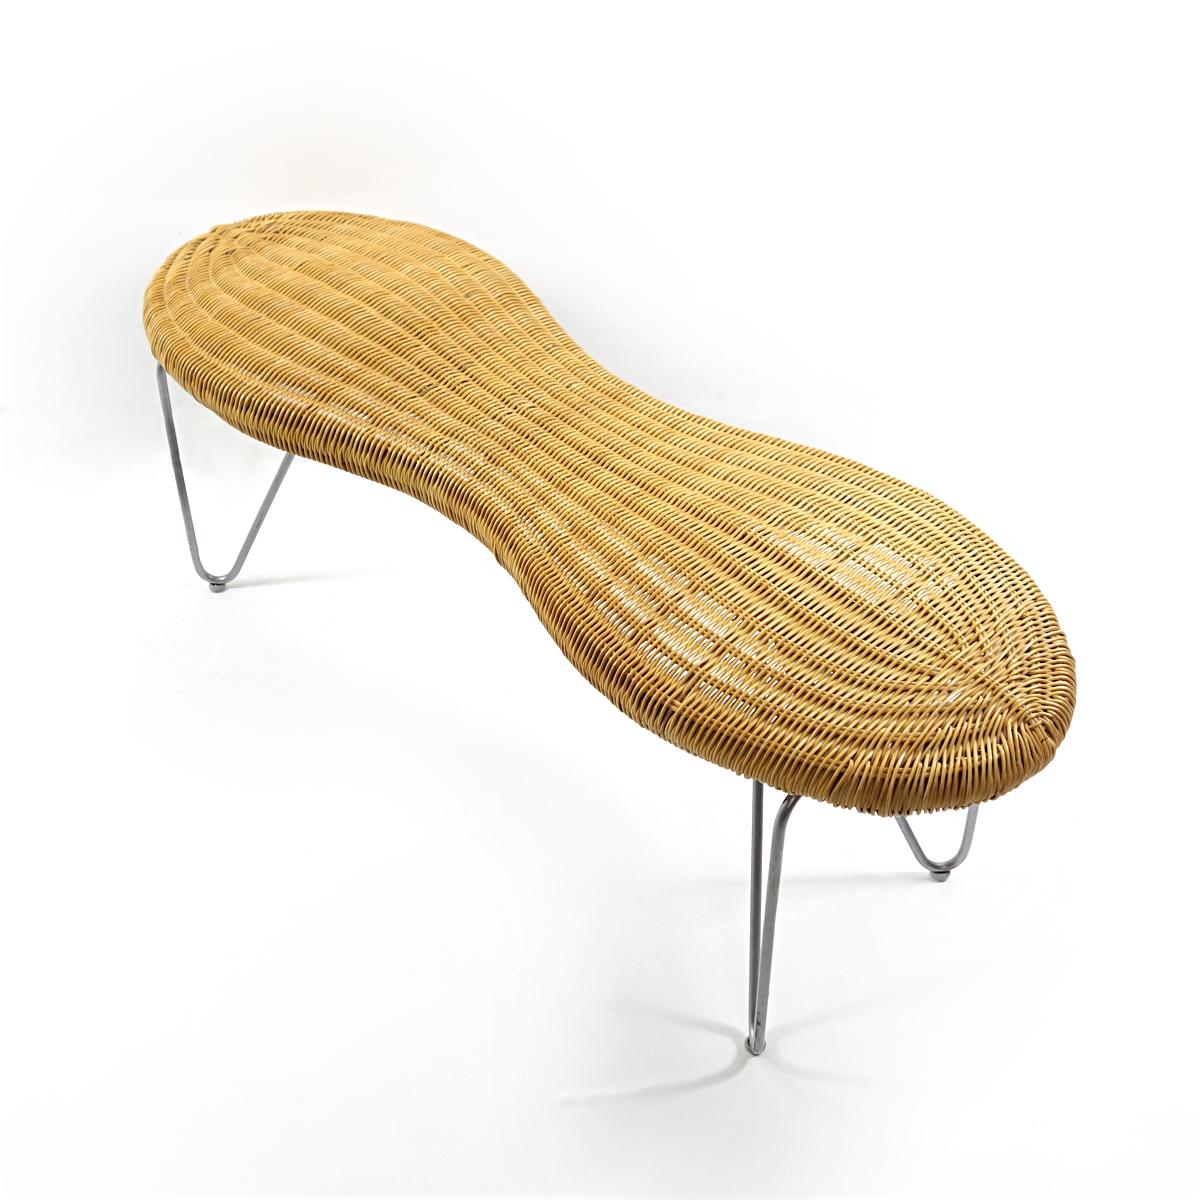 Rattan bench in the shape of a peeling peanut, a limited edition by Ikea from the 1990s. The 3D shapes of the rattan seat have been crafted professionally. The form is elegant due to the characteristic waist of the peanut. Apart from that the